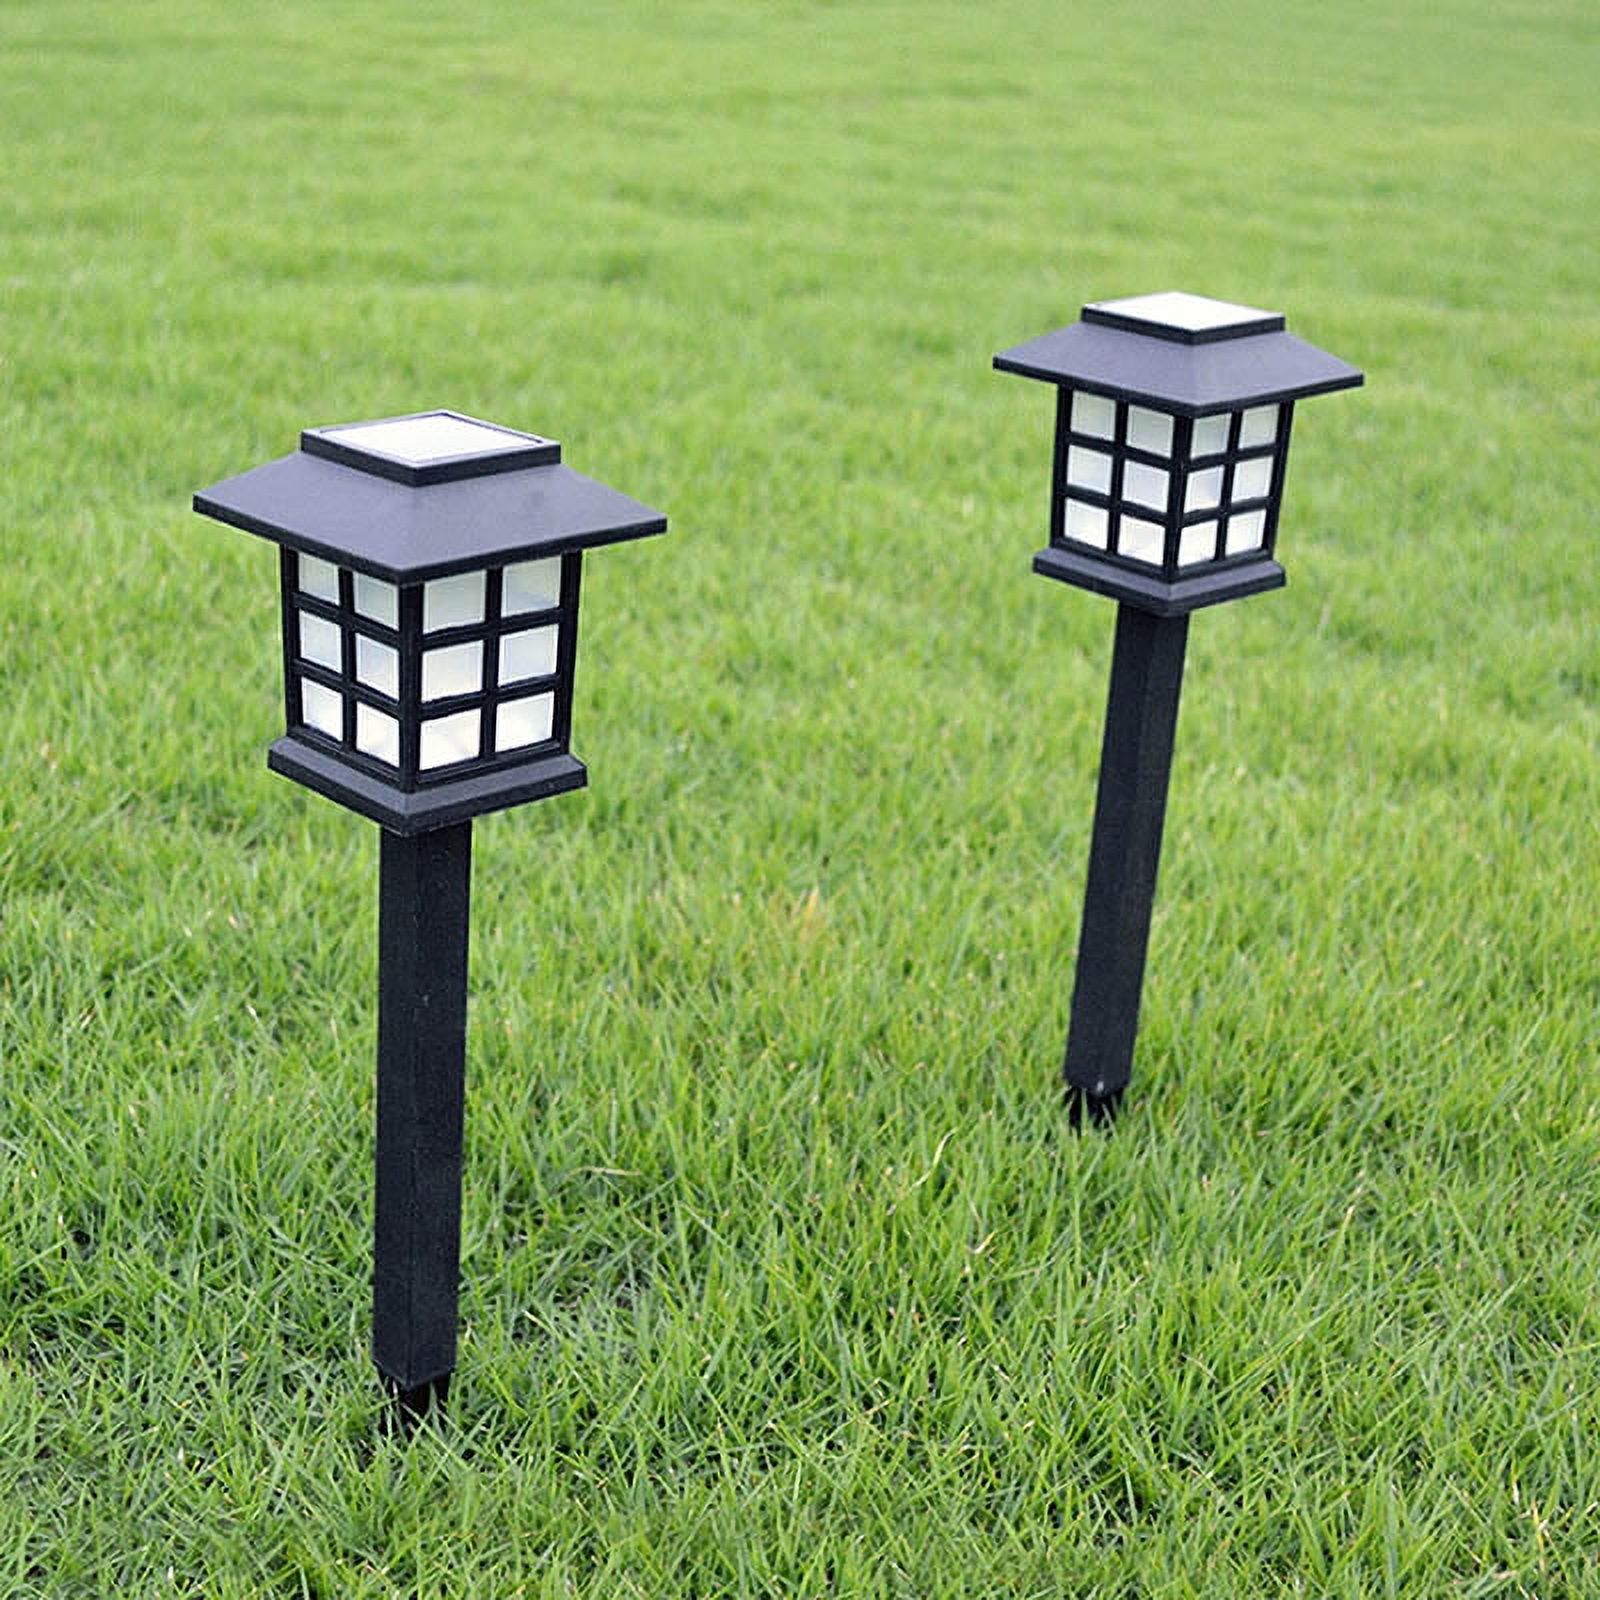 2 Pcs Solar Pathway Lights Outdoor LED Solar Powered Garden Lights for Lawn Patio Yard;2 Pcs Solar Pathway Lights Outdoor LED Solar Powered Garden Lights - image 4 of 9